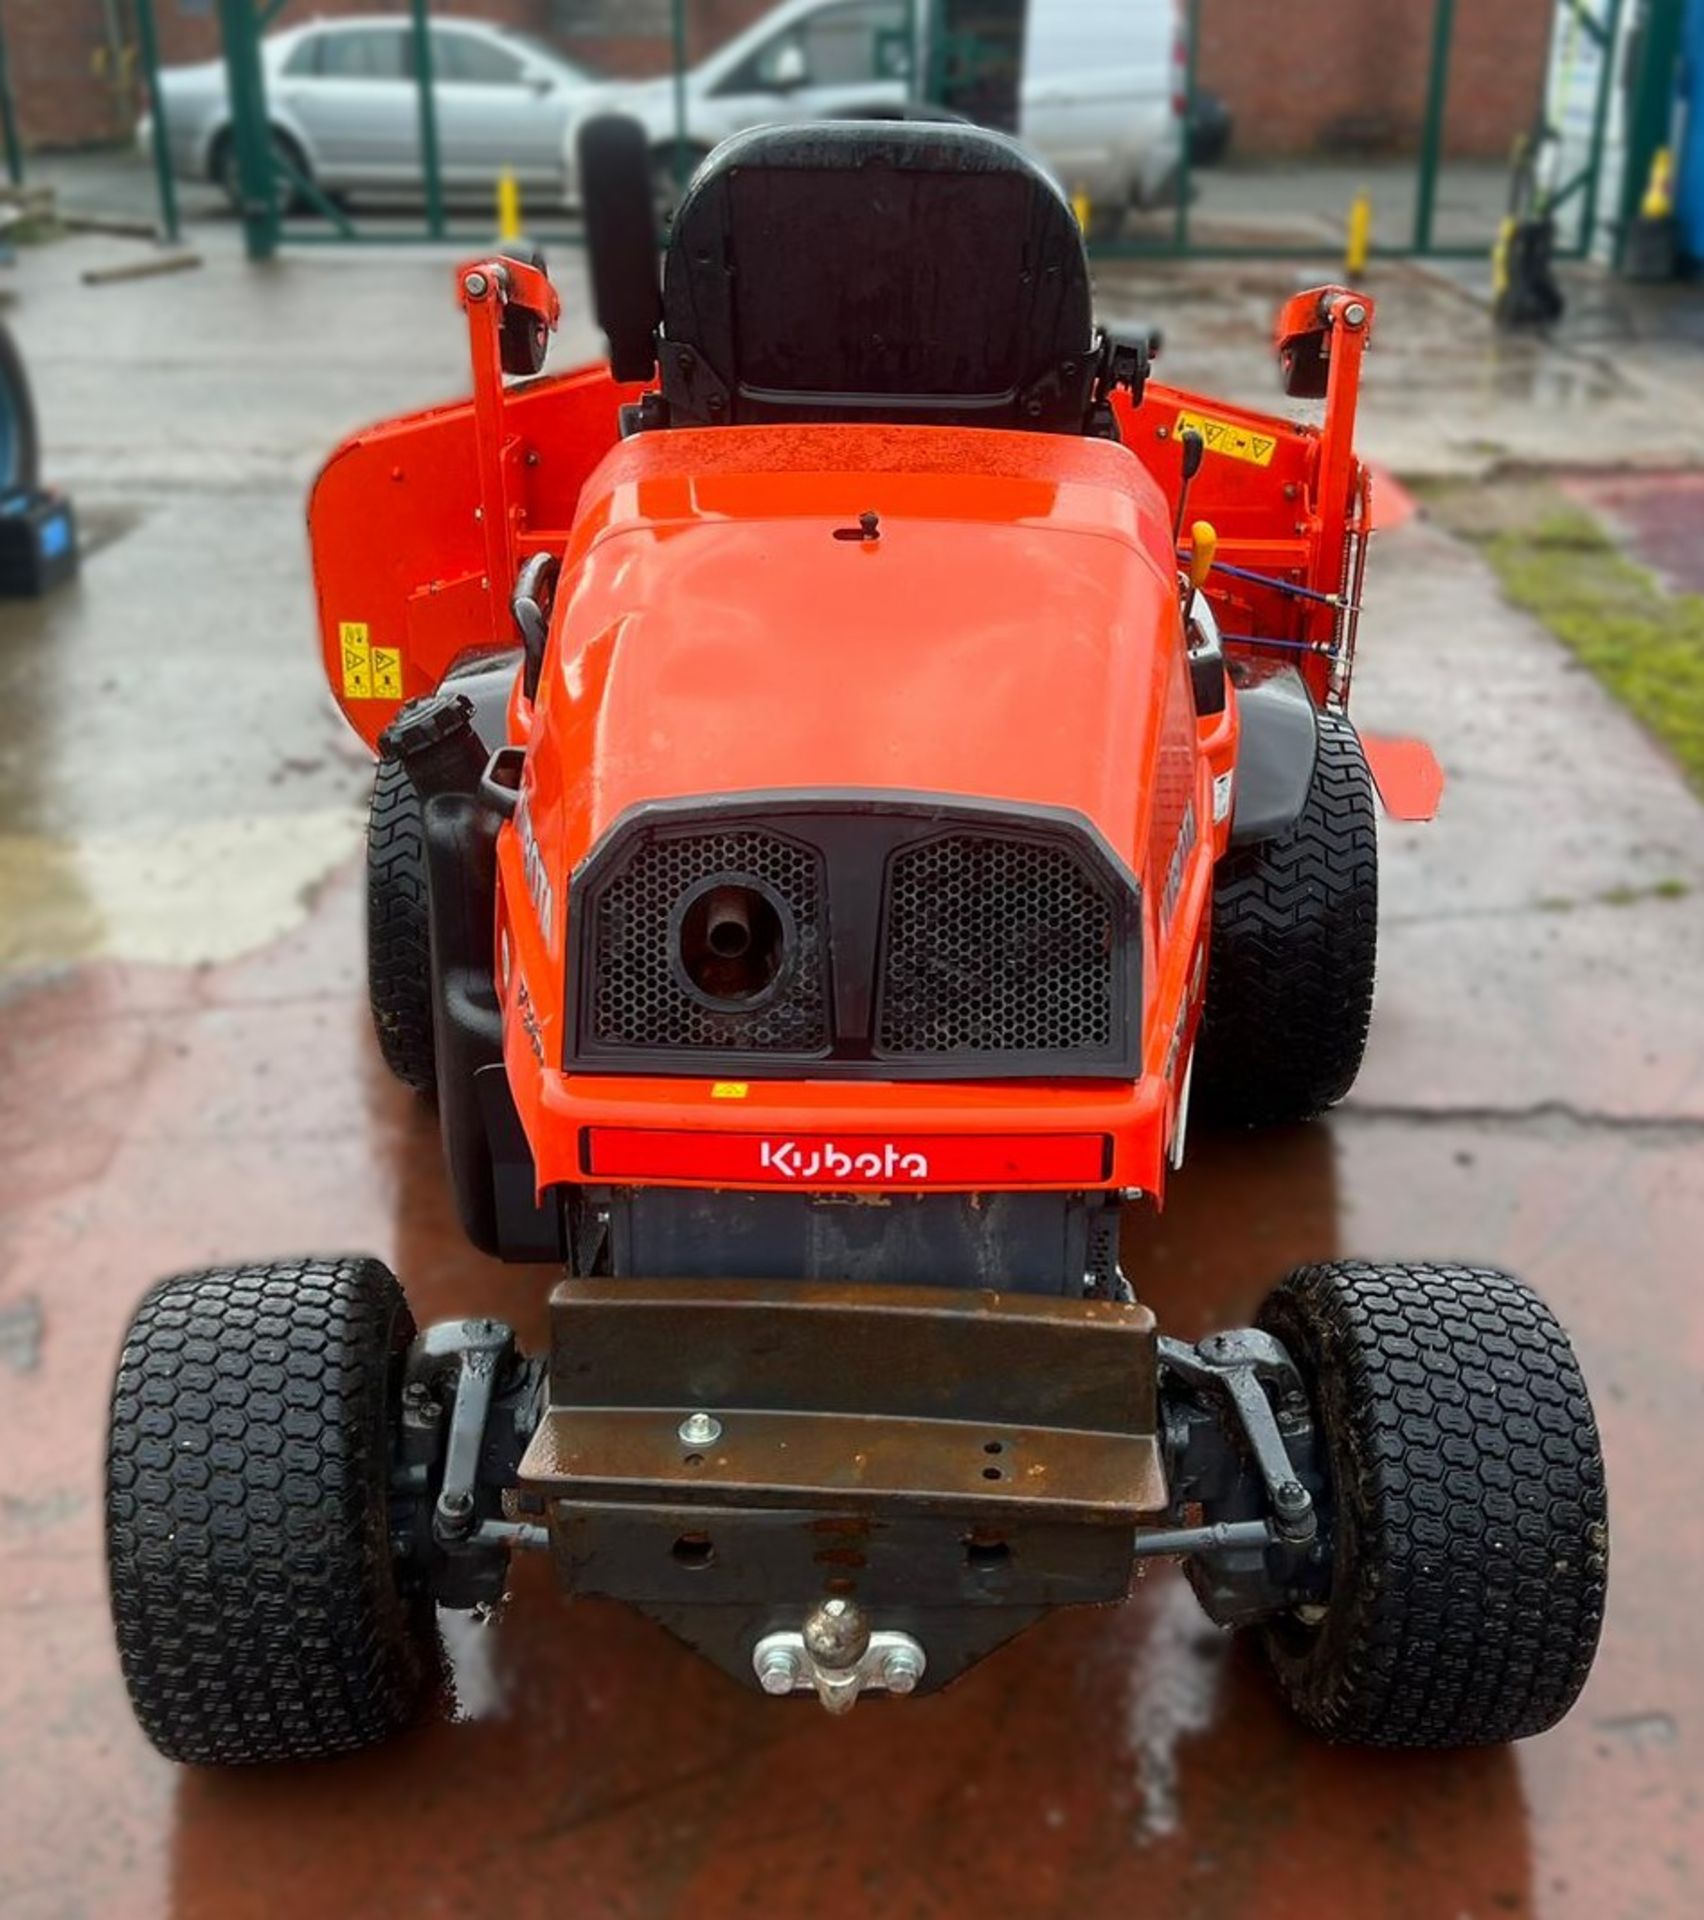 A Kubota F3680-EC 4WD Ride On Mower with 3 blade Mower Deck (one blade missing) and towing hitch, - Image 8 of 13